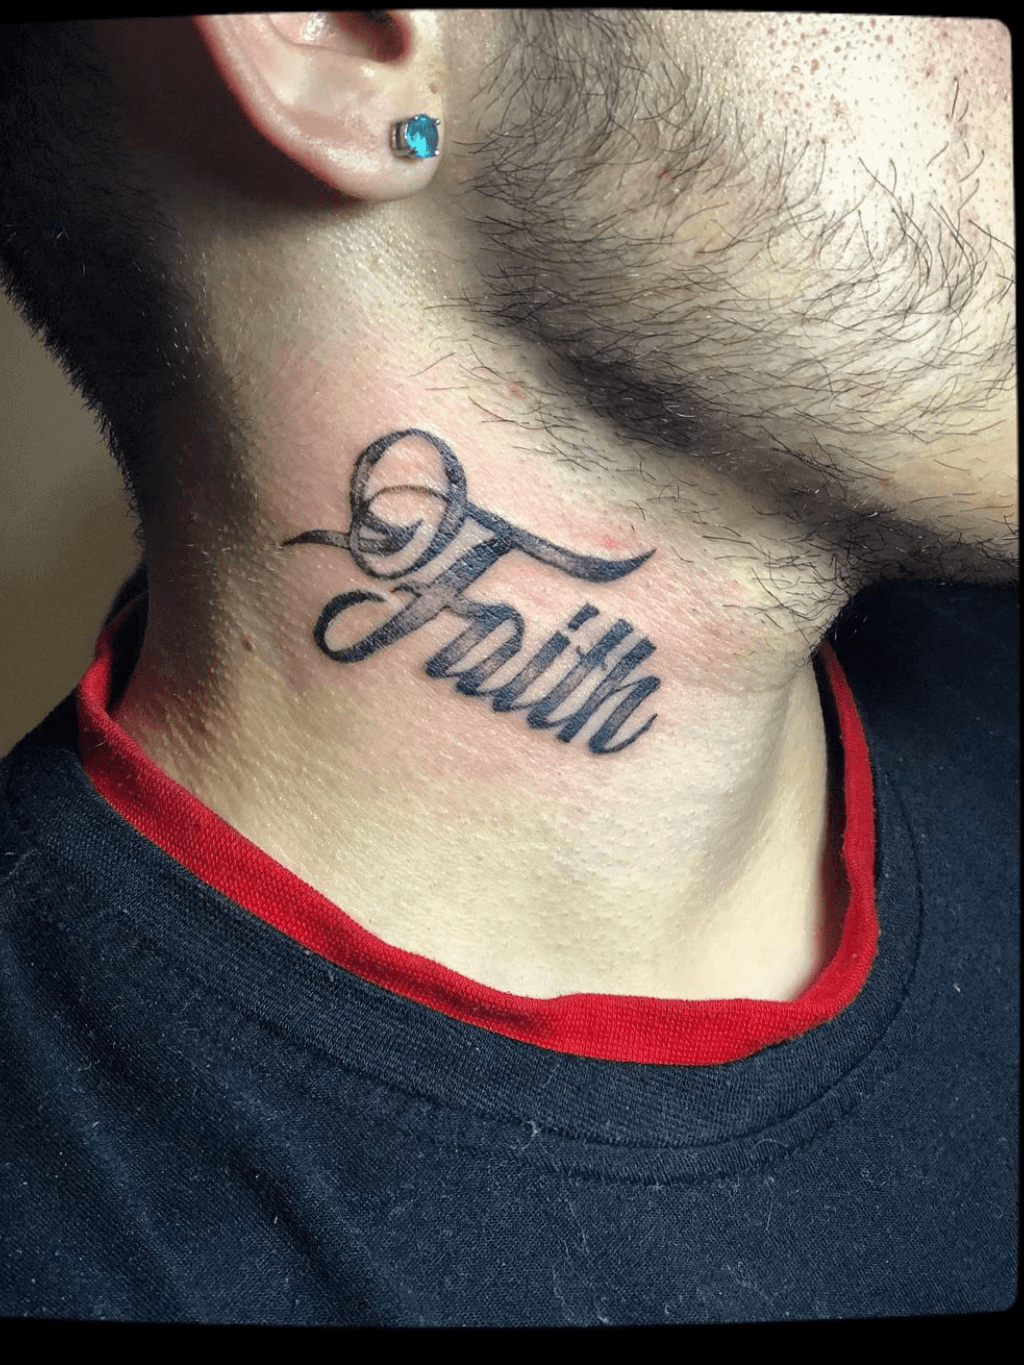 Faith Tattoos And DesignsFaith Tattoo Meanings And Ideas  HubPages